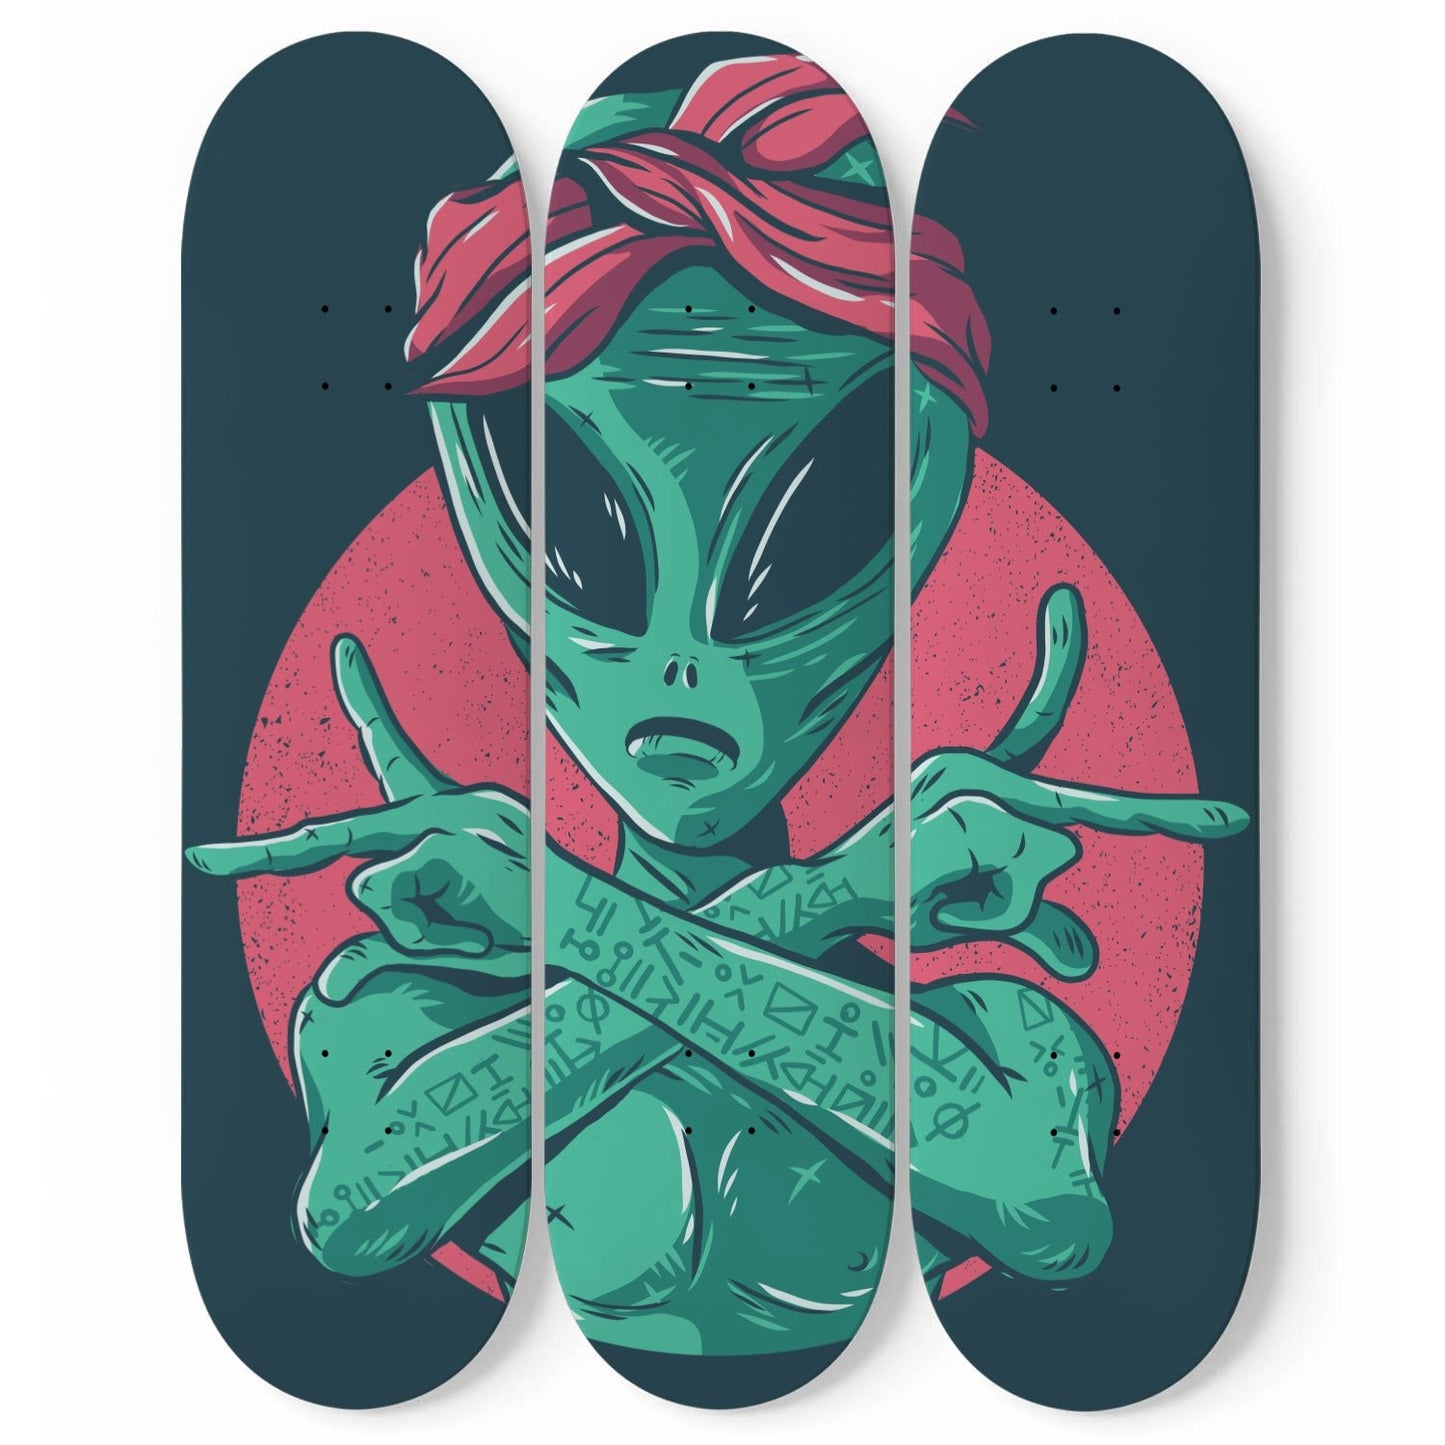 Space Odyssey #4.0 - Skater Wall